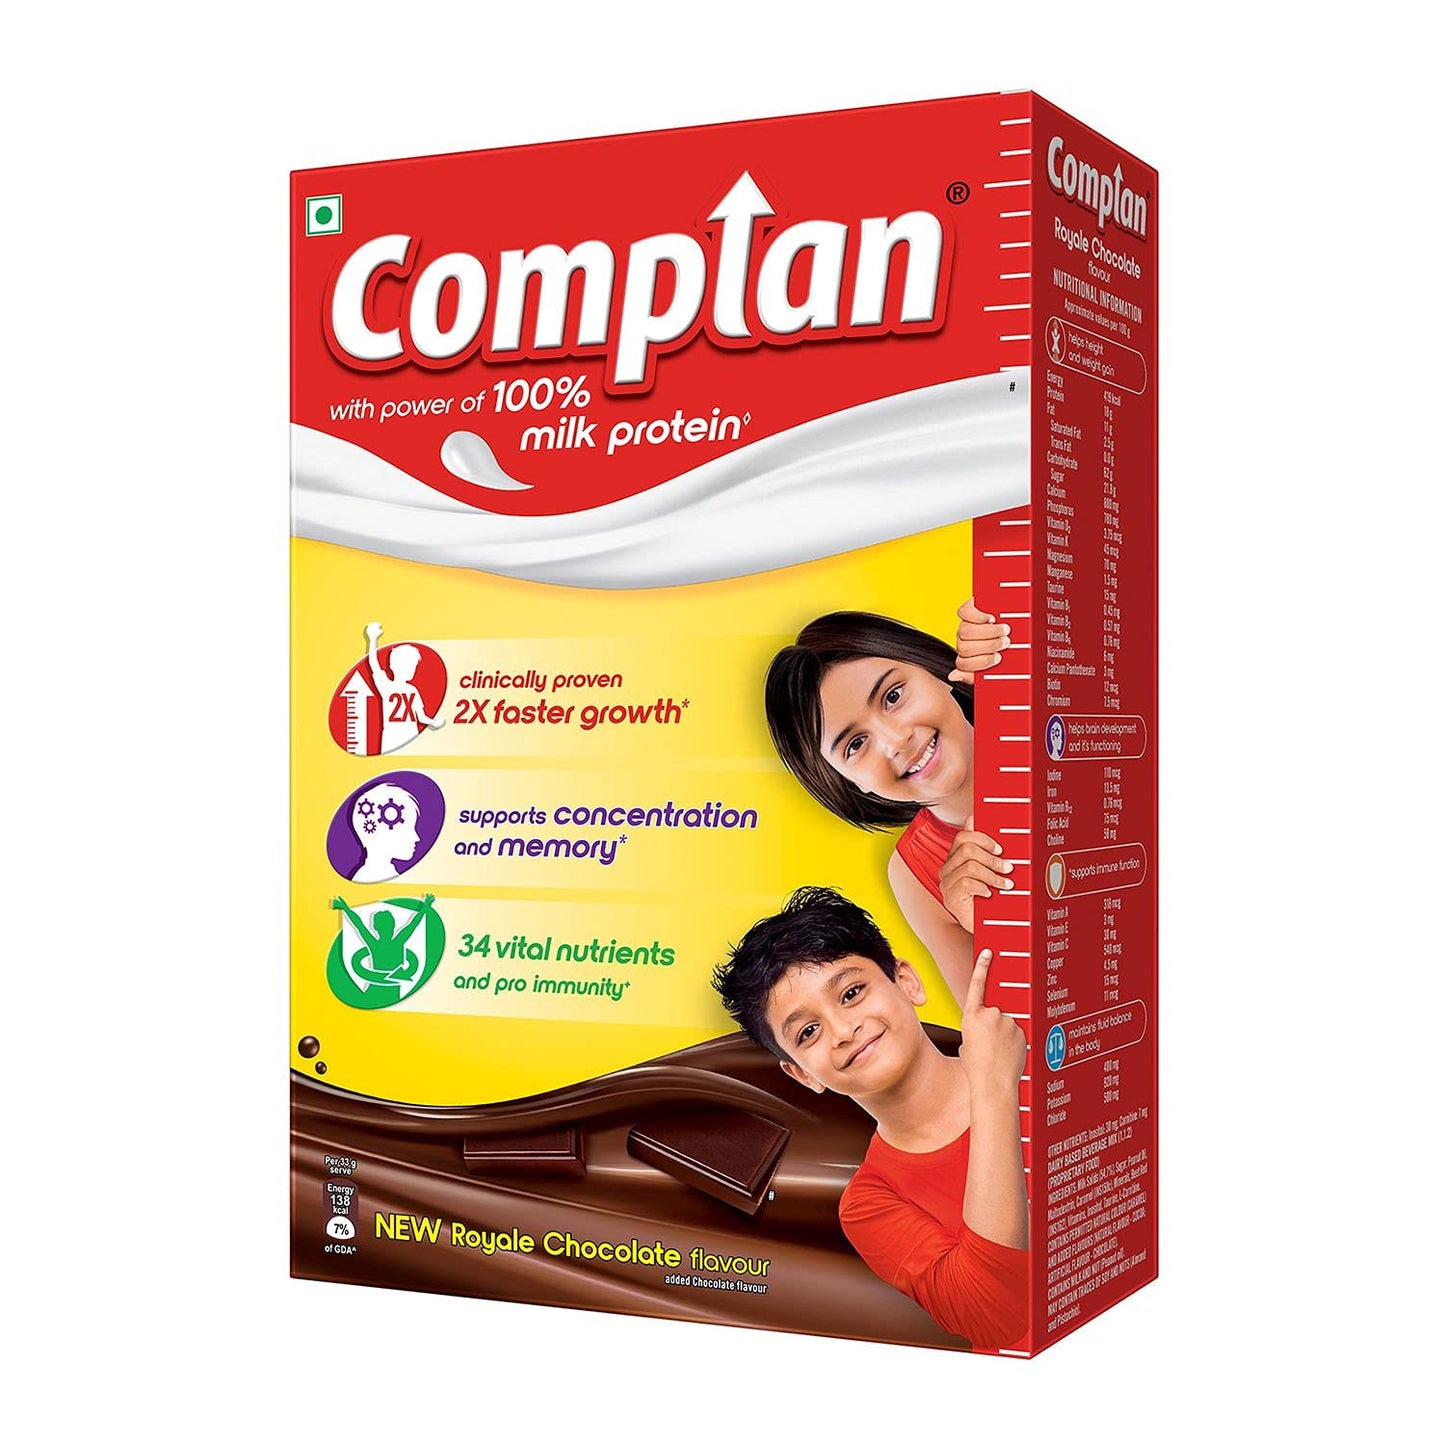 Complan Nutrition and Health Drink Royale Chocolate - 750gm (Refill)